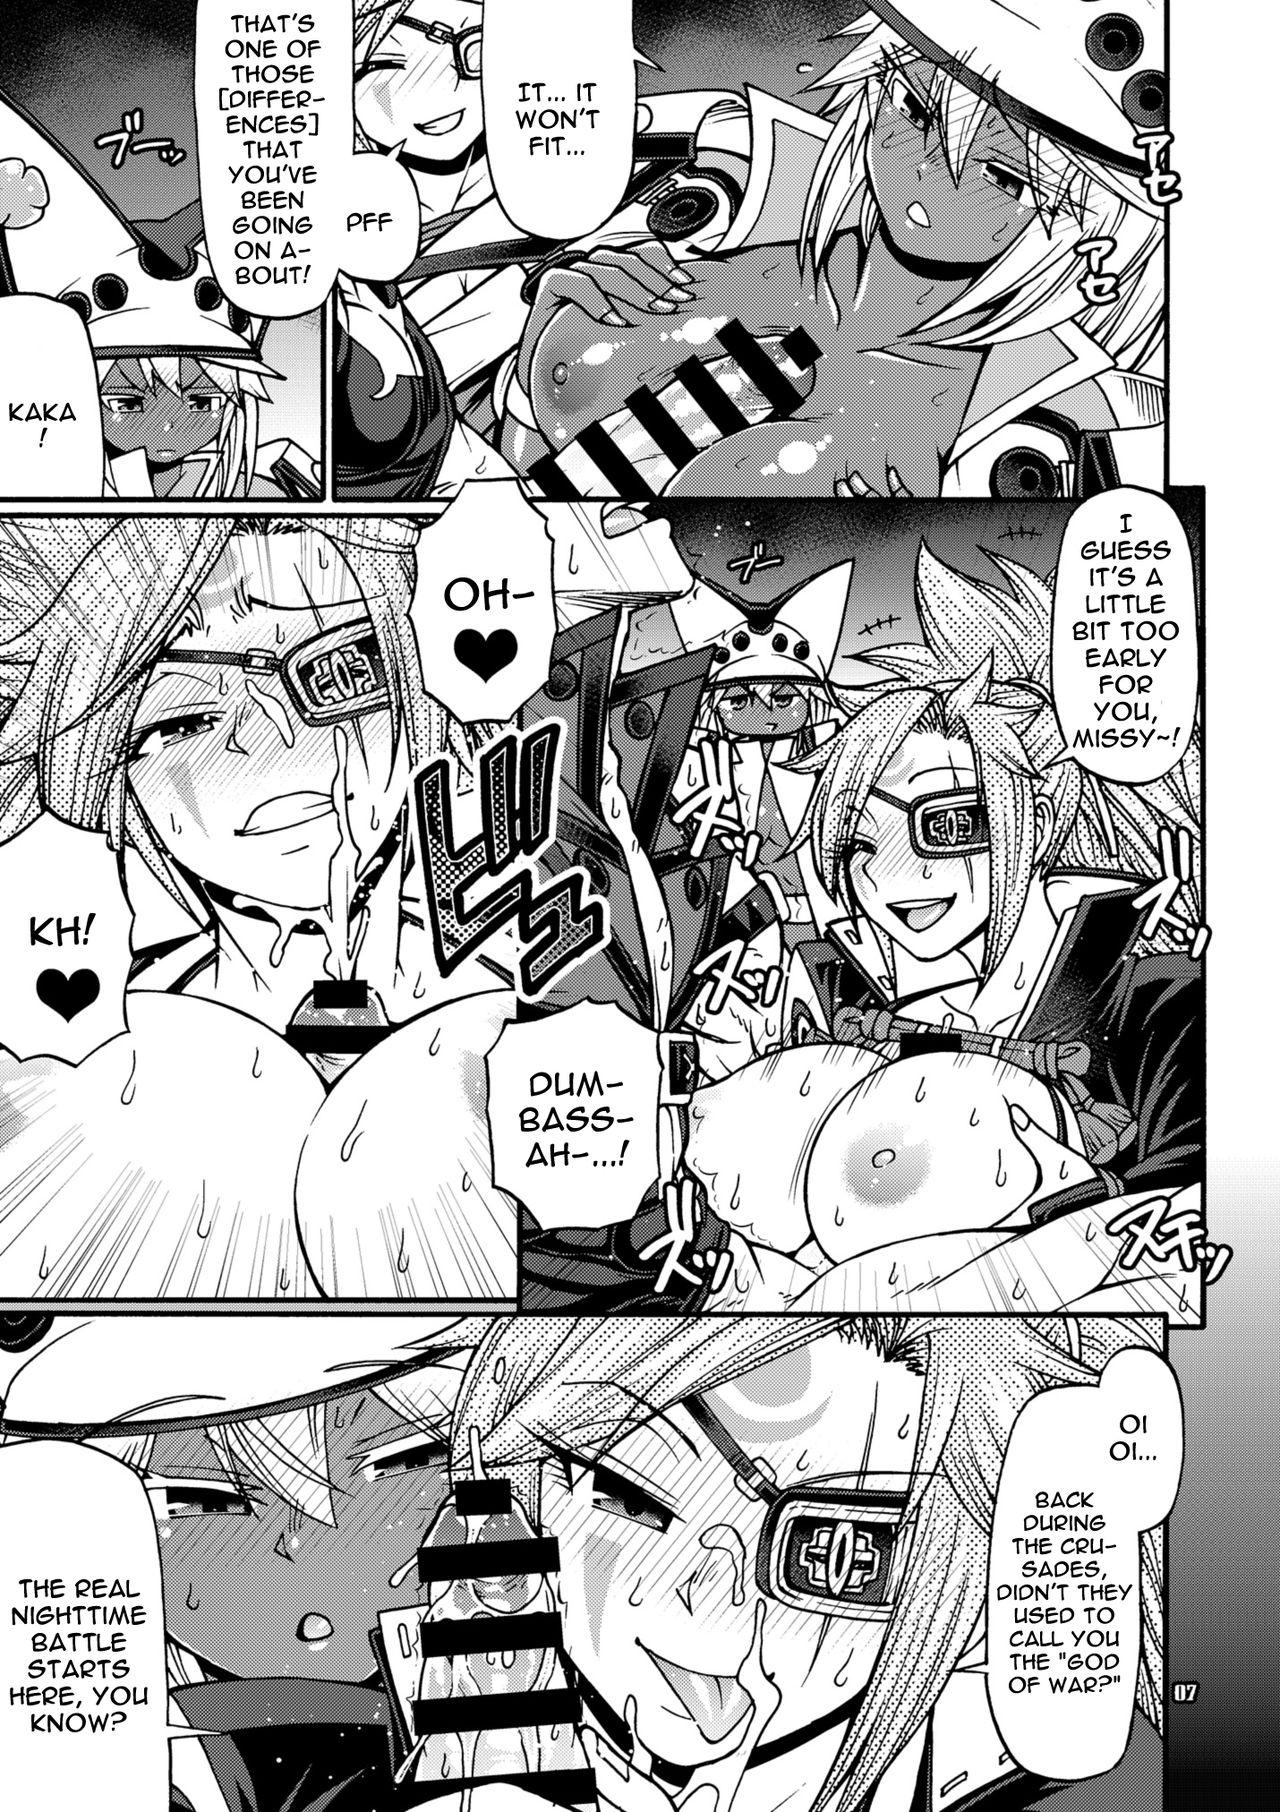 Boobs Do What You Wanna Do - Guilty gear Fleshlight - Page 6